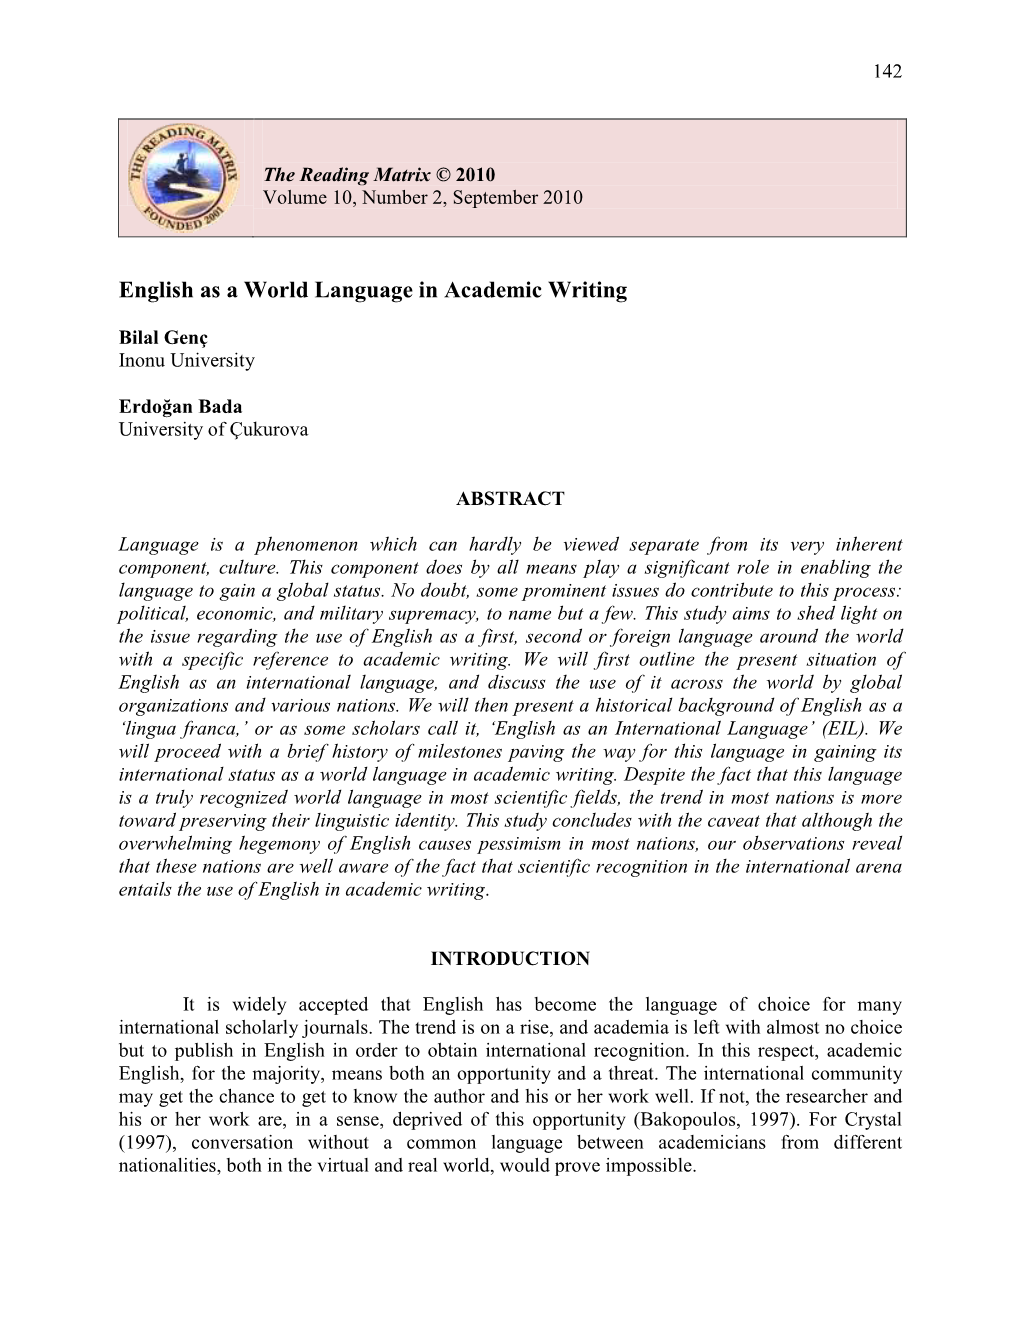 English As a World Language in Academic Writing